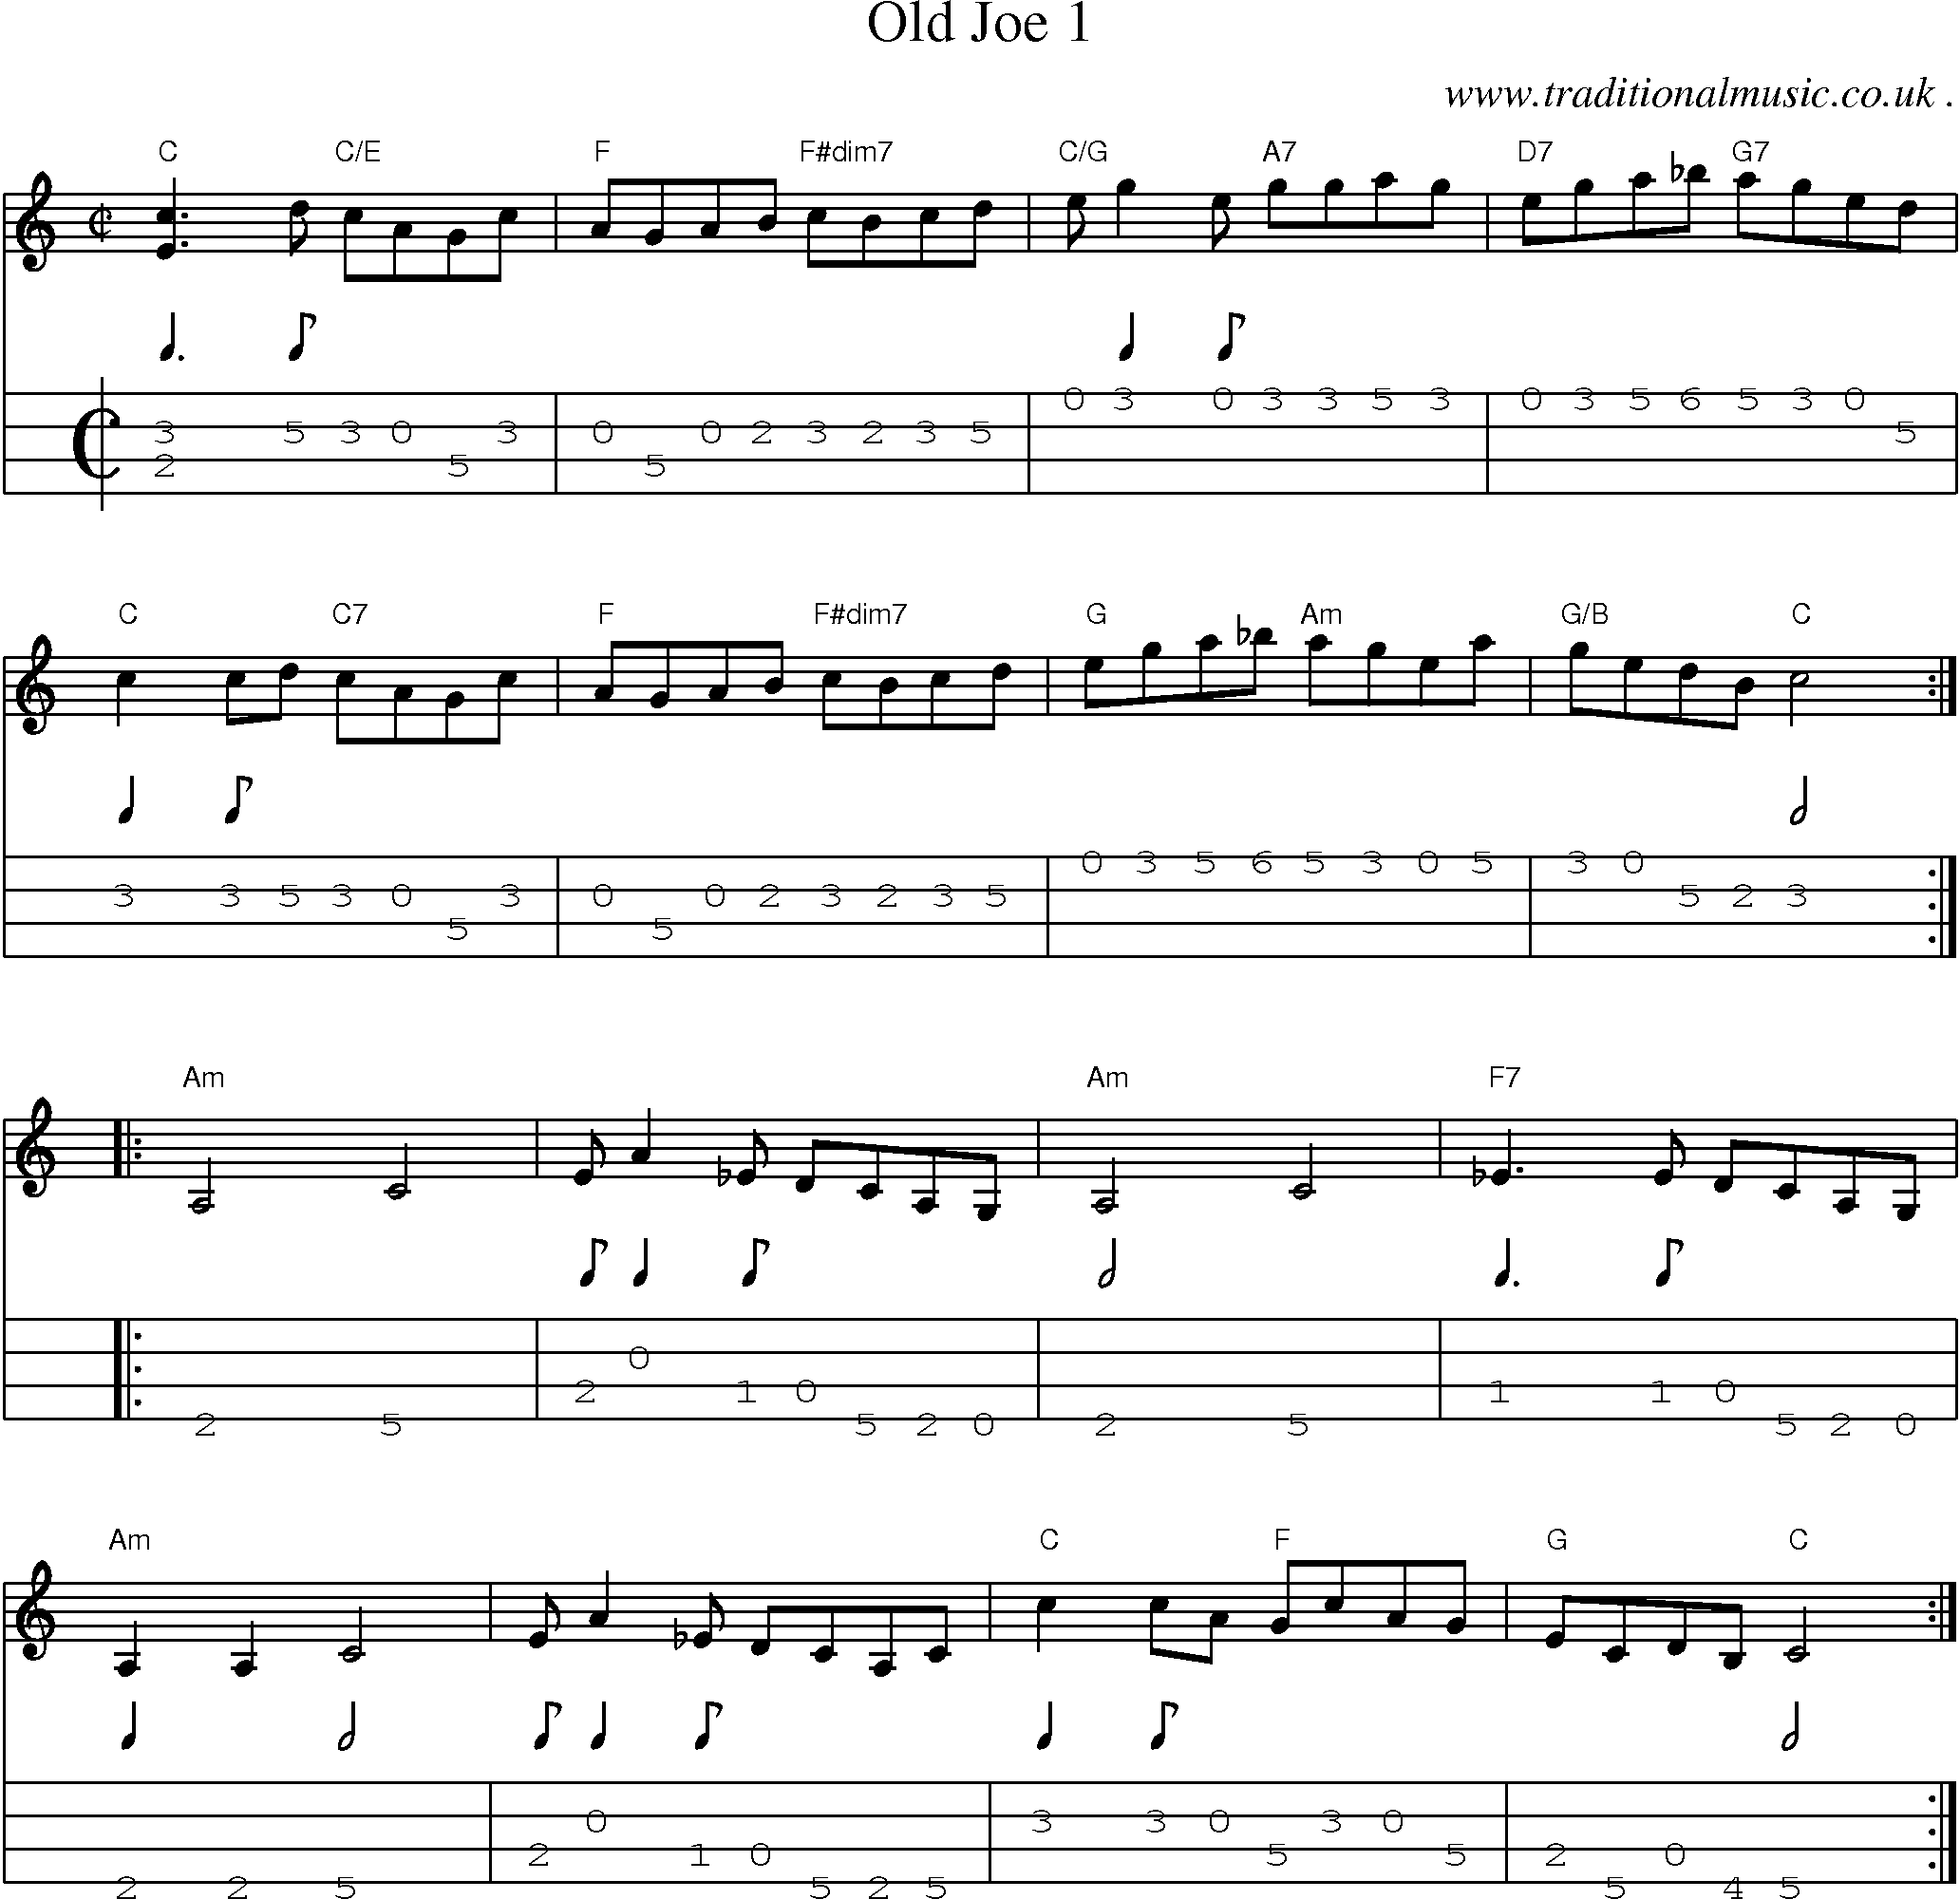 Music Score and Mandolin Tabs for Old Joe 1